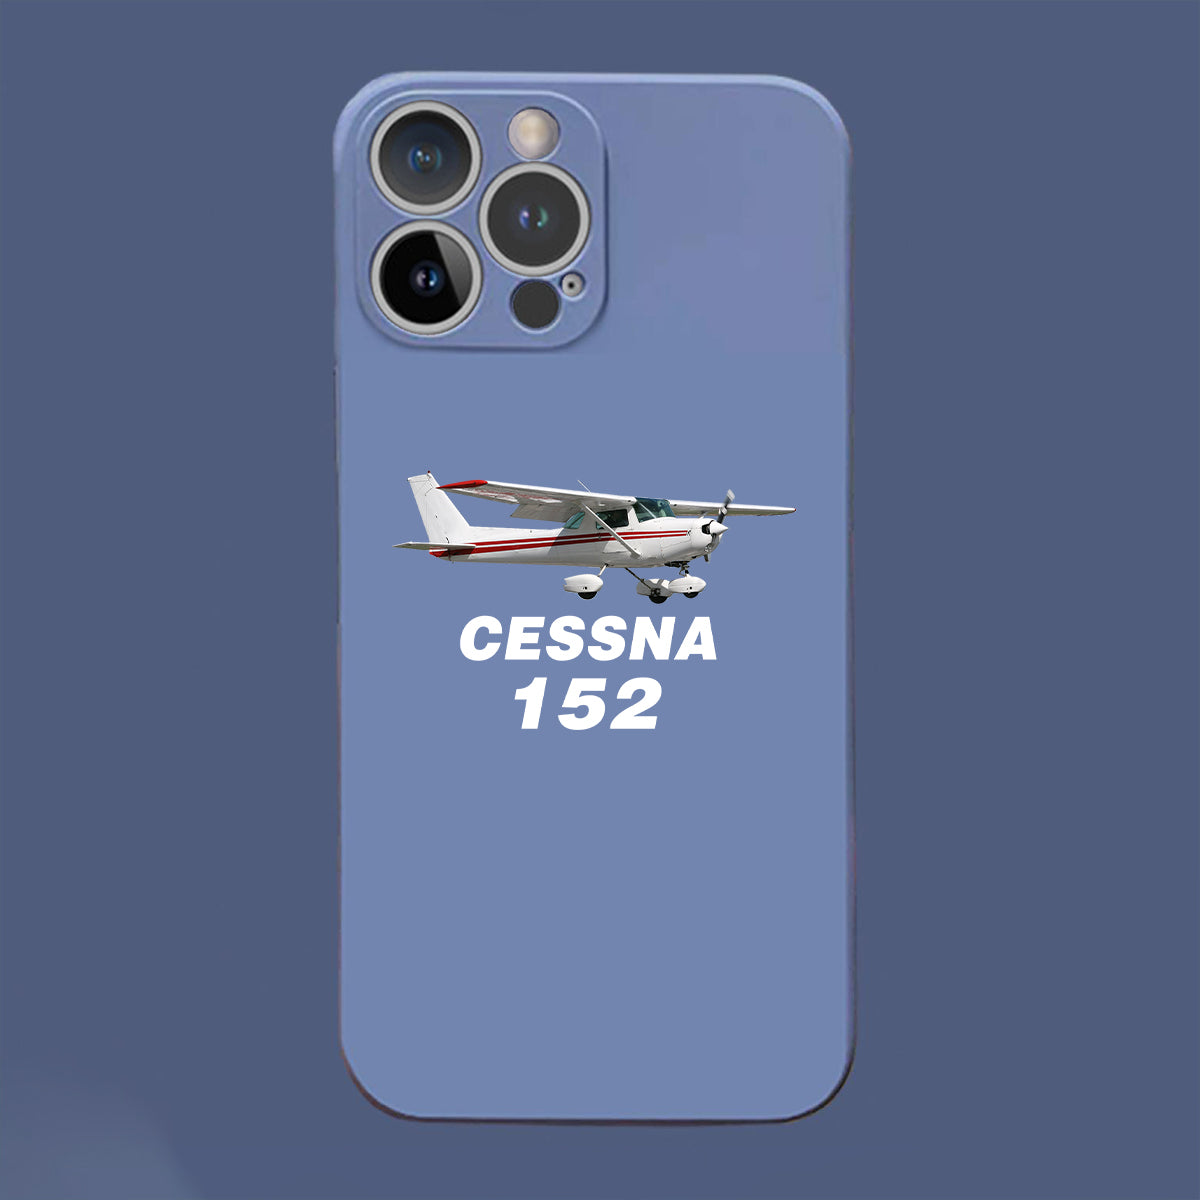 The Cessna 152 Designed Soft Silicone iPhone Cases